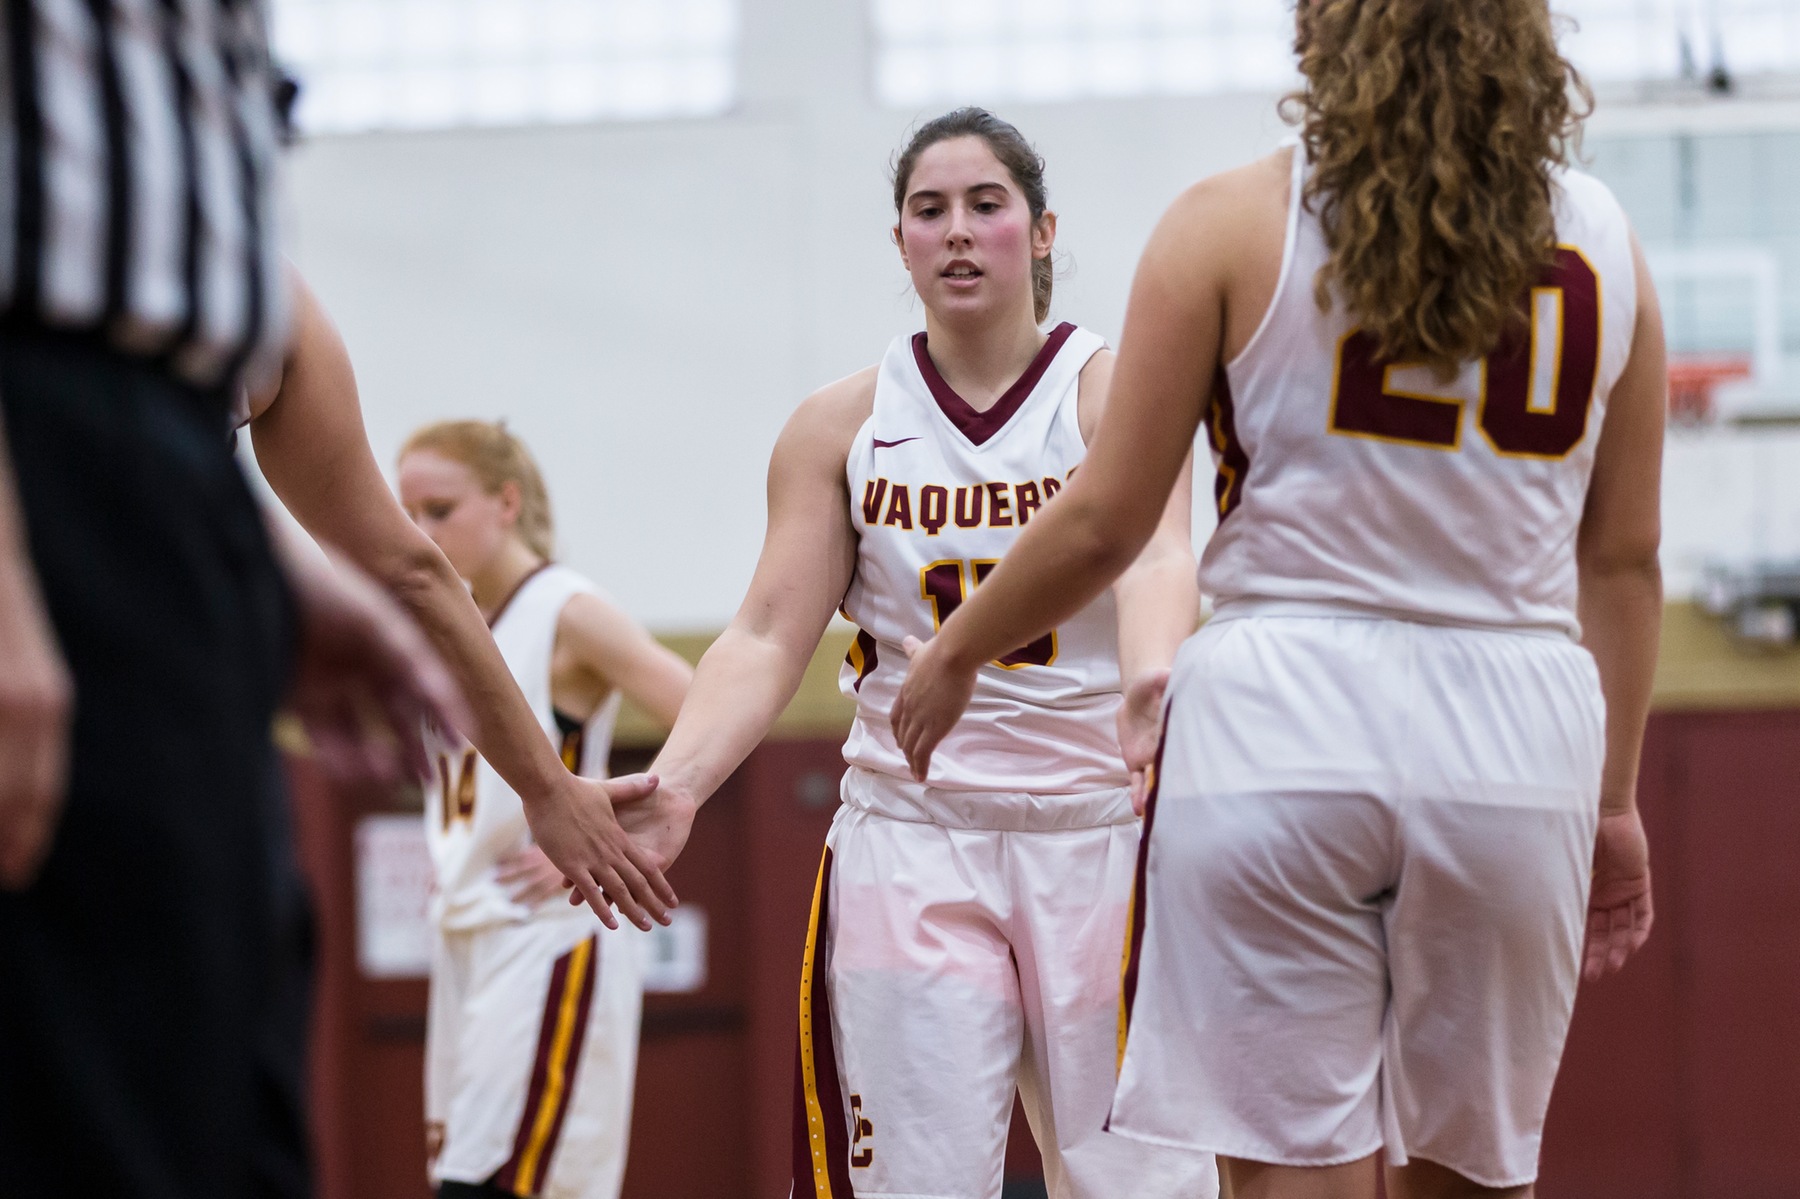 Women's Basketball streaks to 16-4 record with 78-54 win over Victor Valley